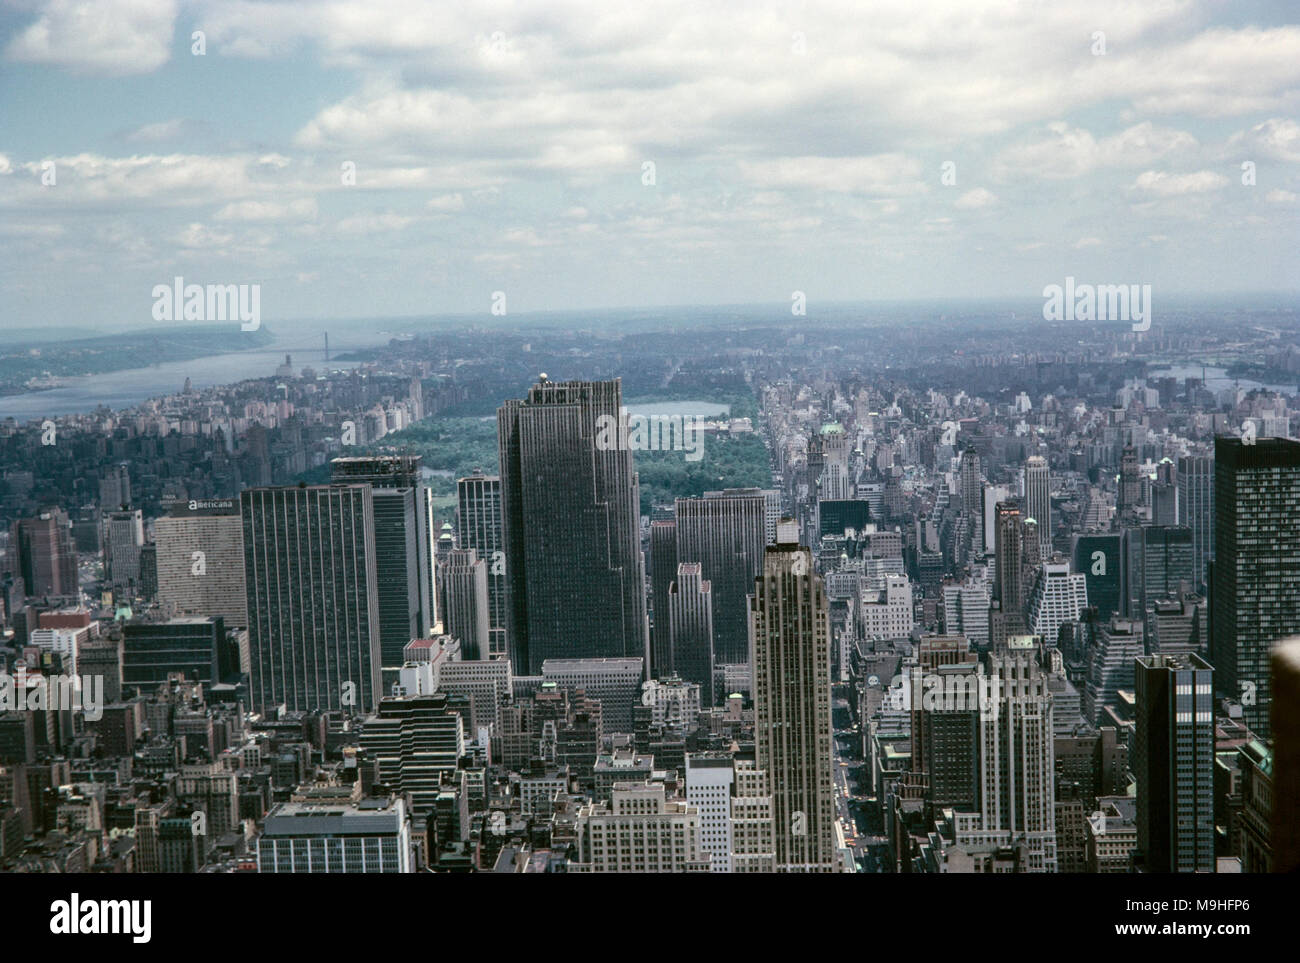 June 1964. View from the top of the Empire State Building in New York, looking North towards Central park. The Park Sheraton Hotel on 7th Avenue is visible on the left foreground. Stock Photo